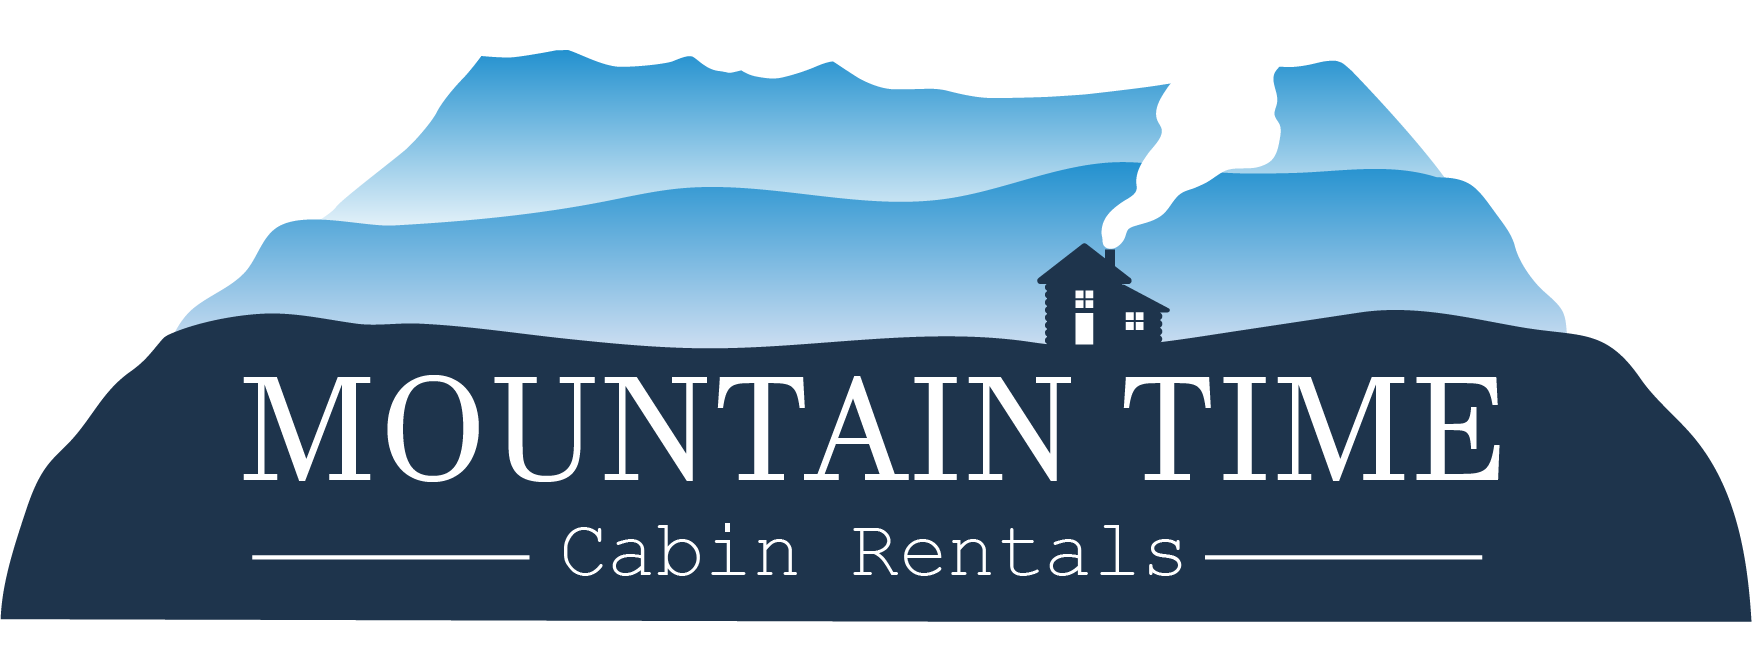 Mountain Time Cabin Rentals